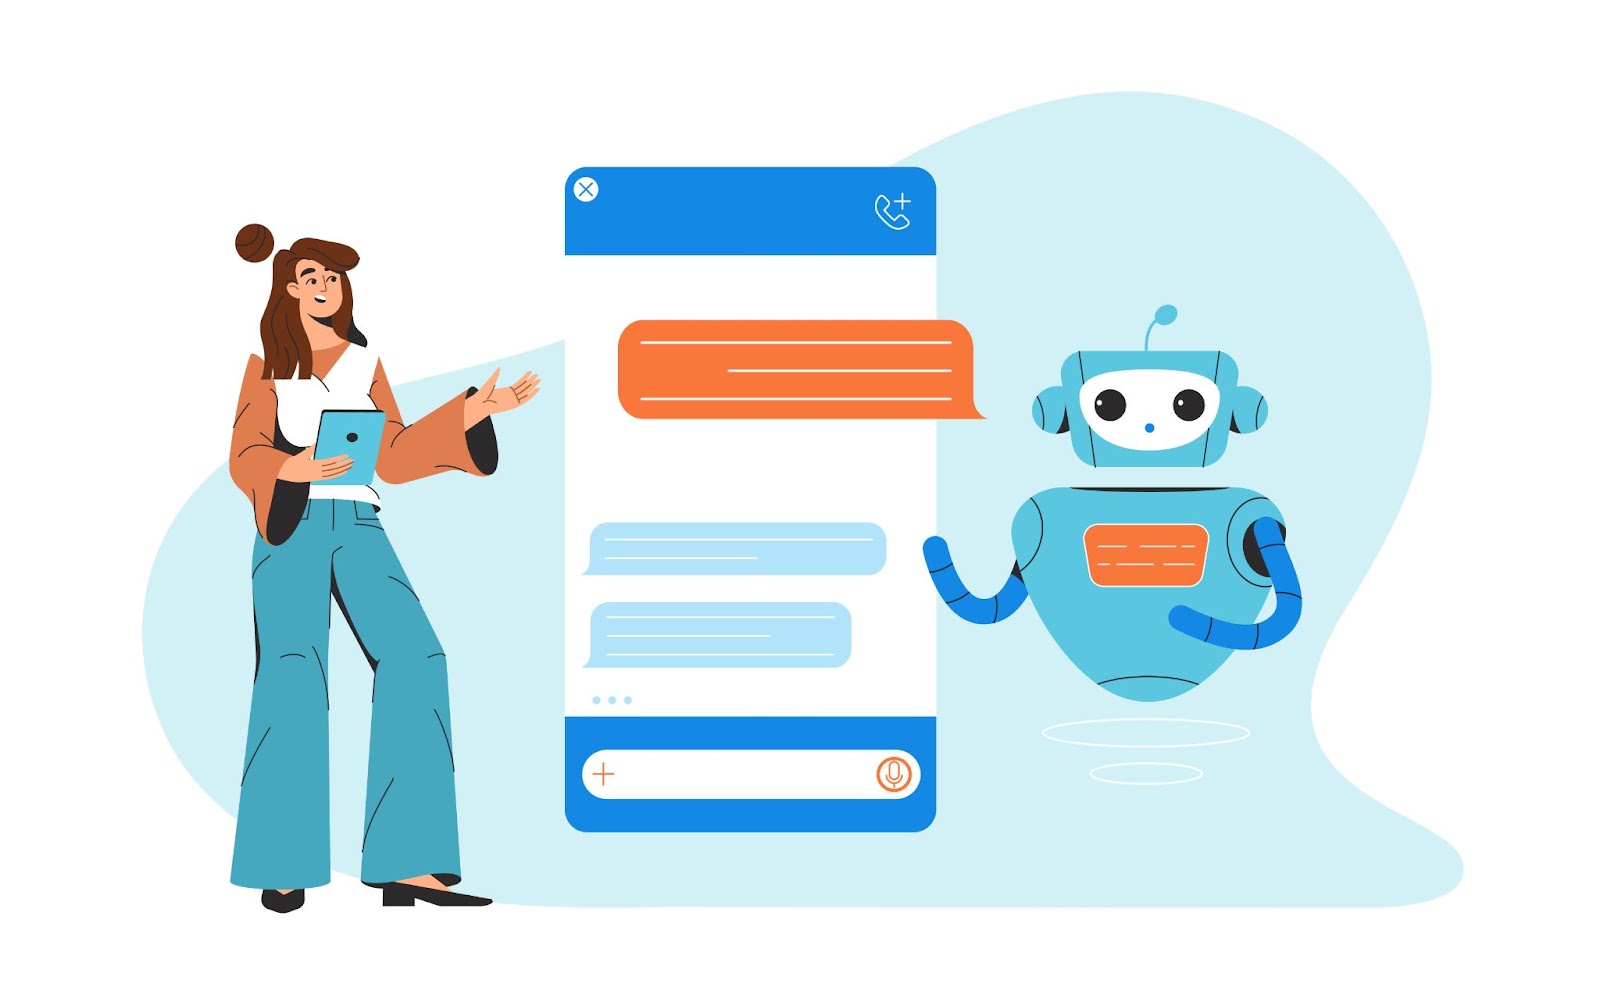 Chatbot live chat tool